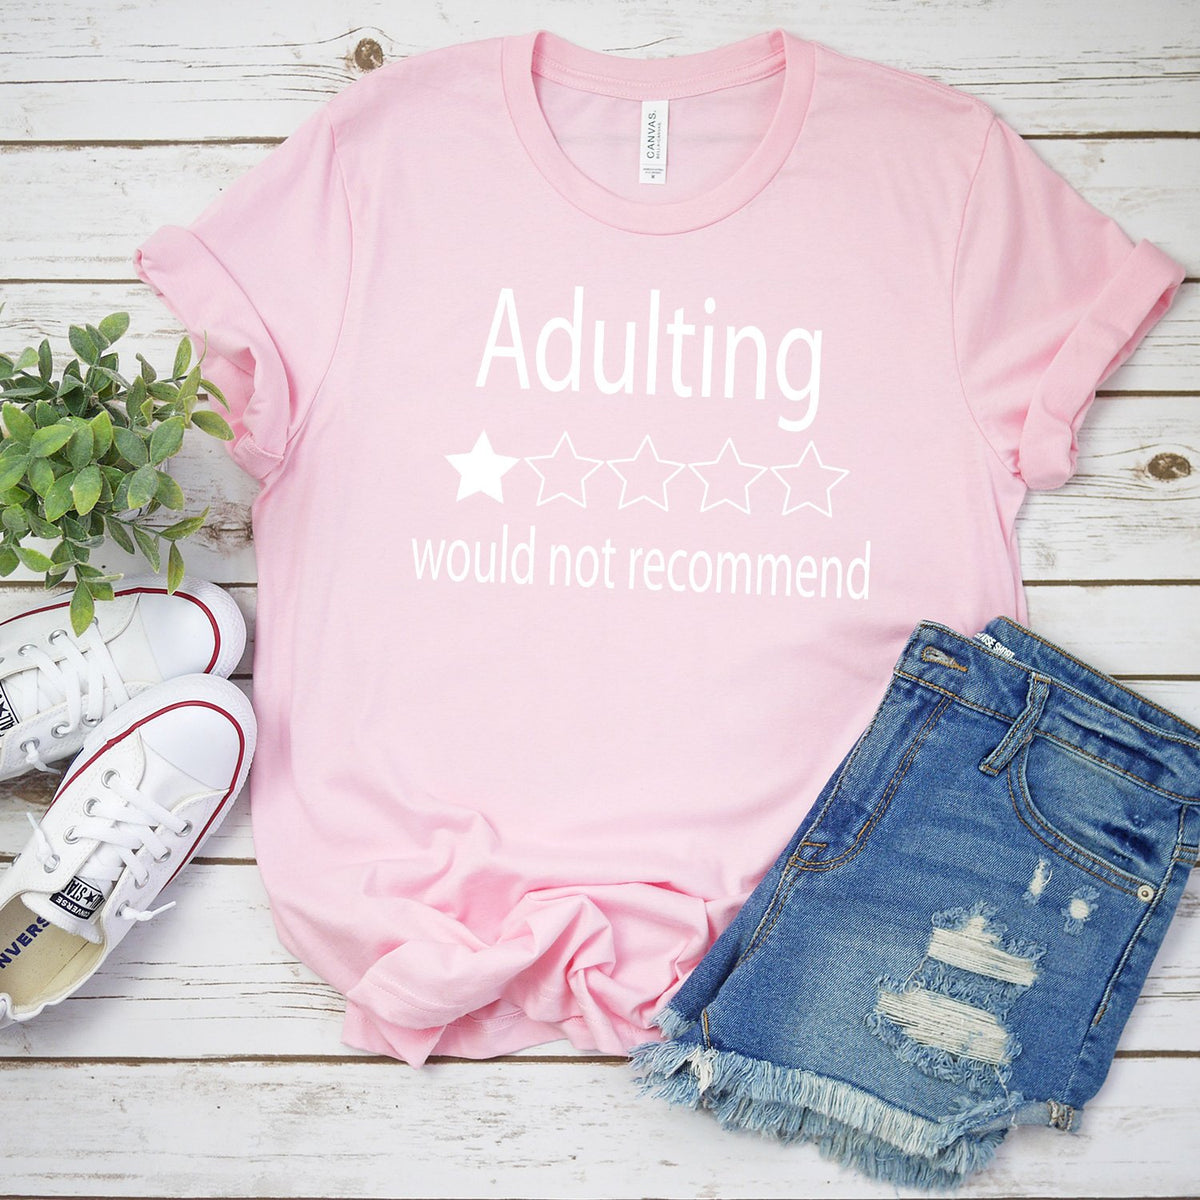 Adulting Would Not Recommend - Short Sleeve Tee Shirt